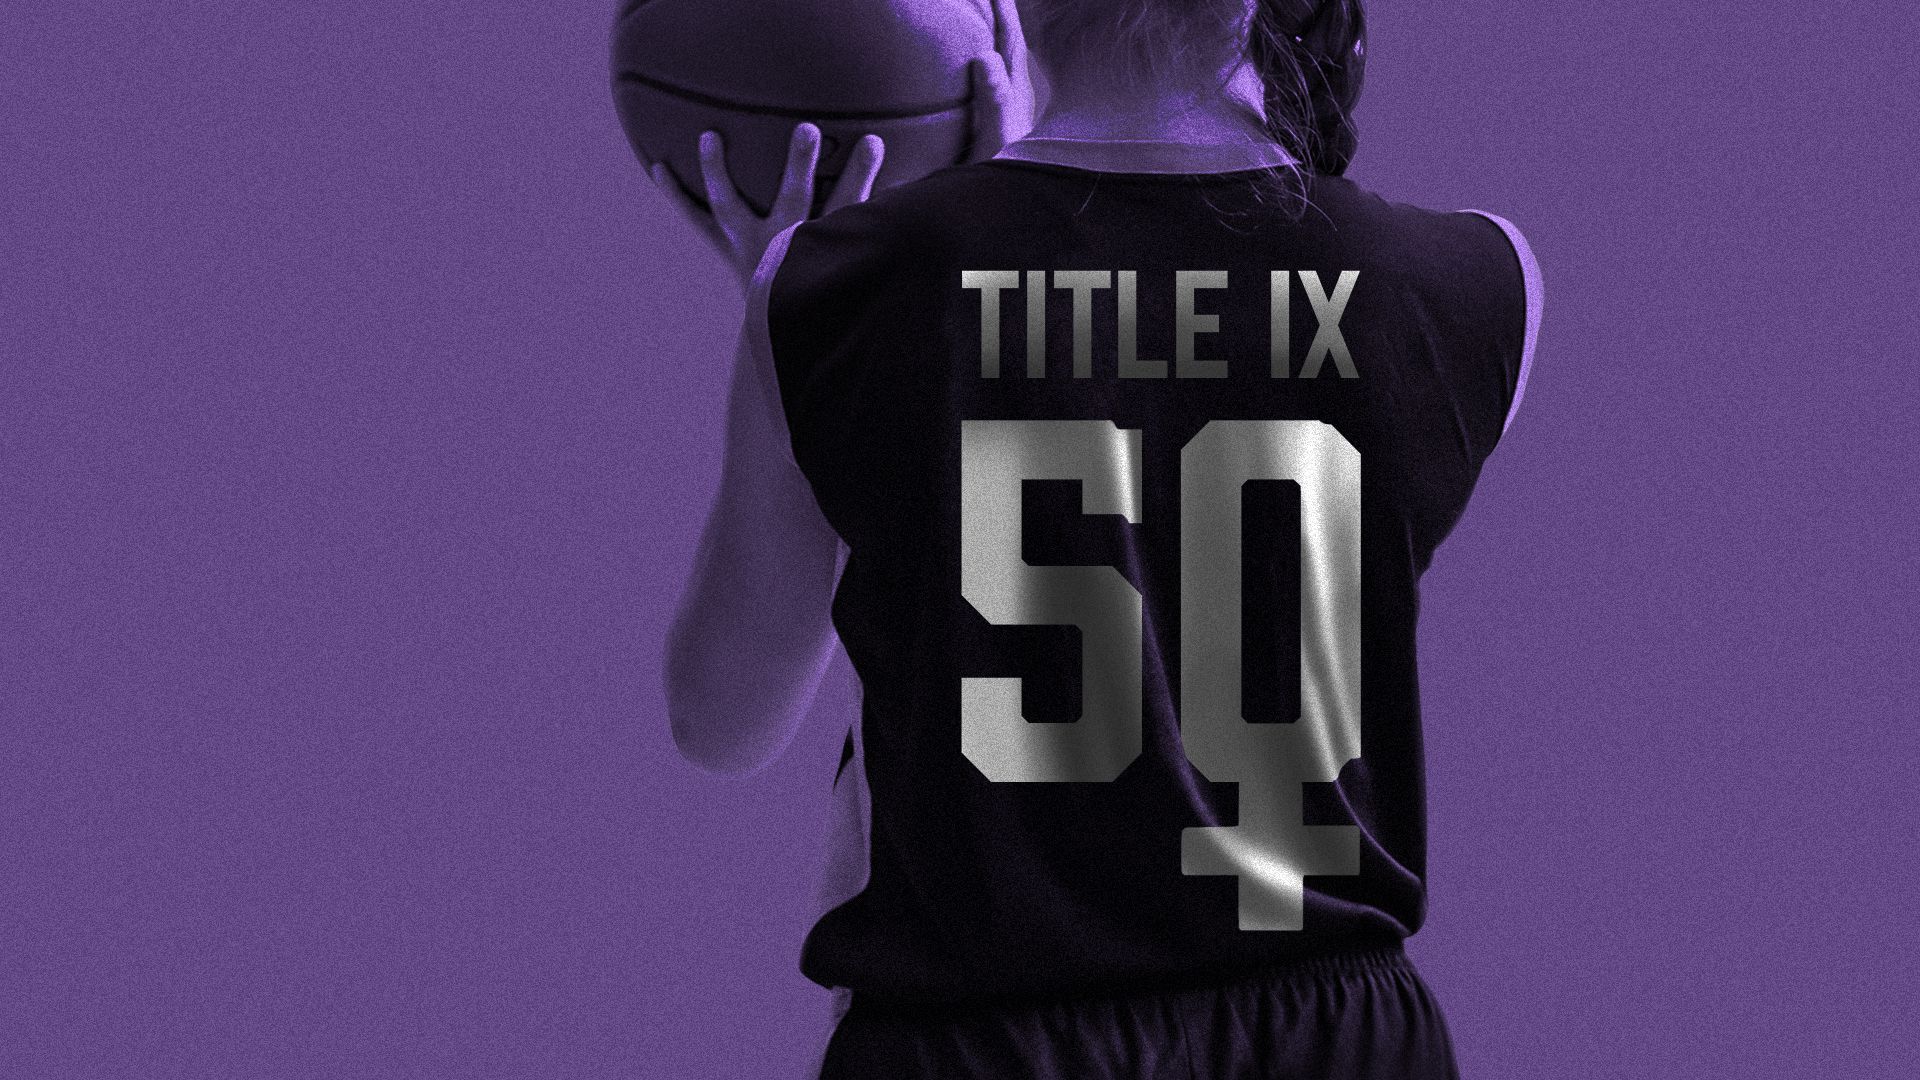 Illustration of Title IX 50 printed on a girl's basketball jersey